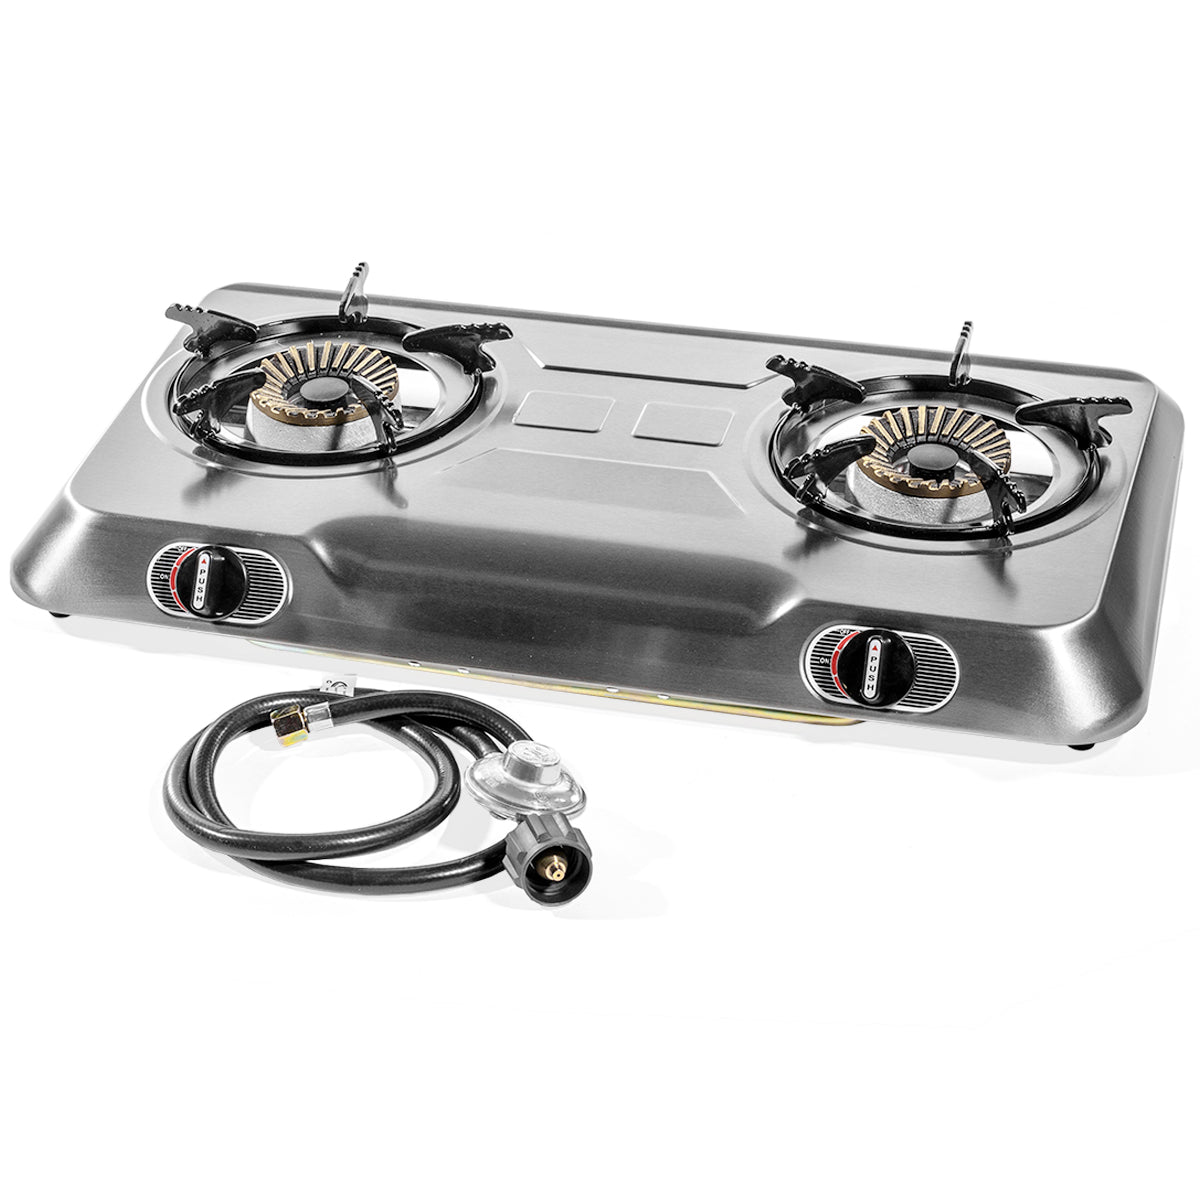 Which Stove Top Burner is Your Favorite?